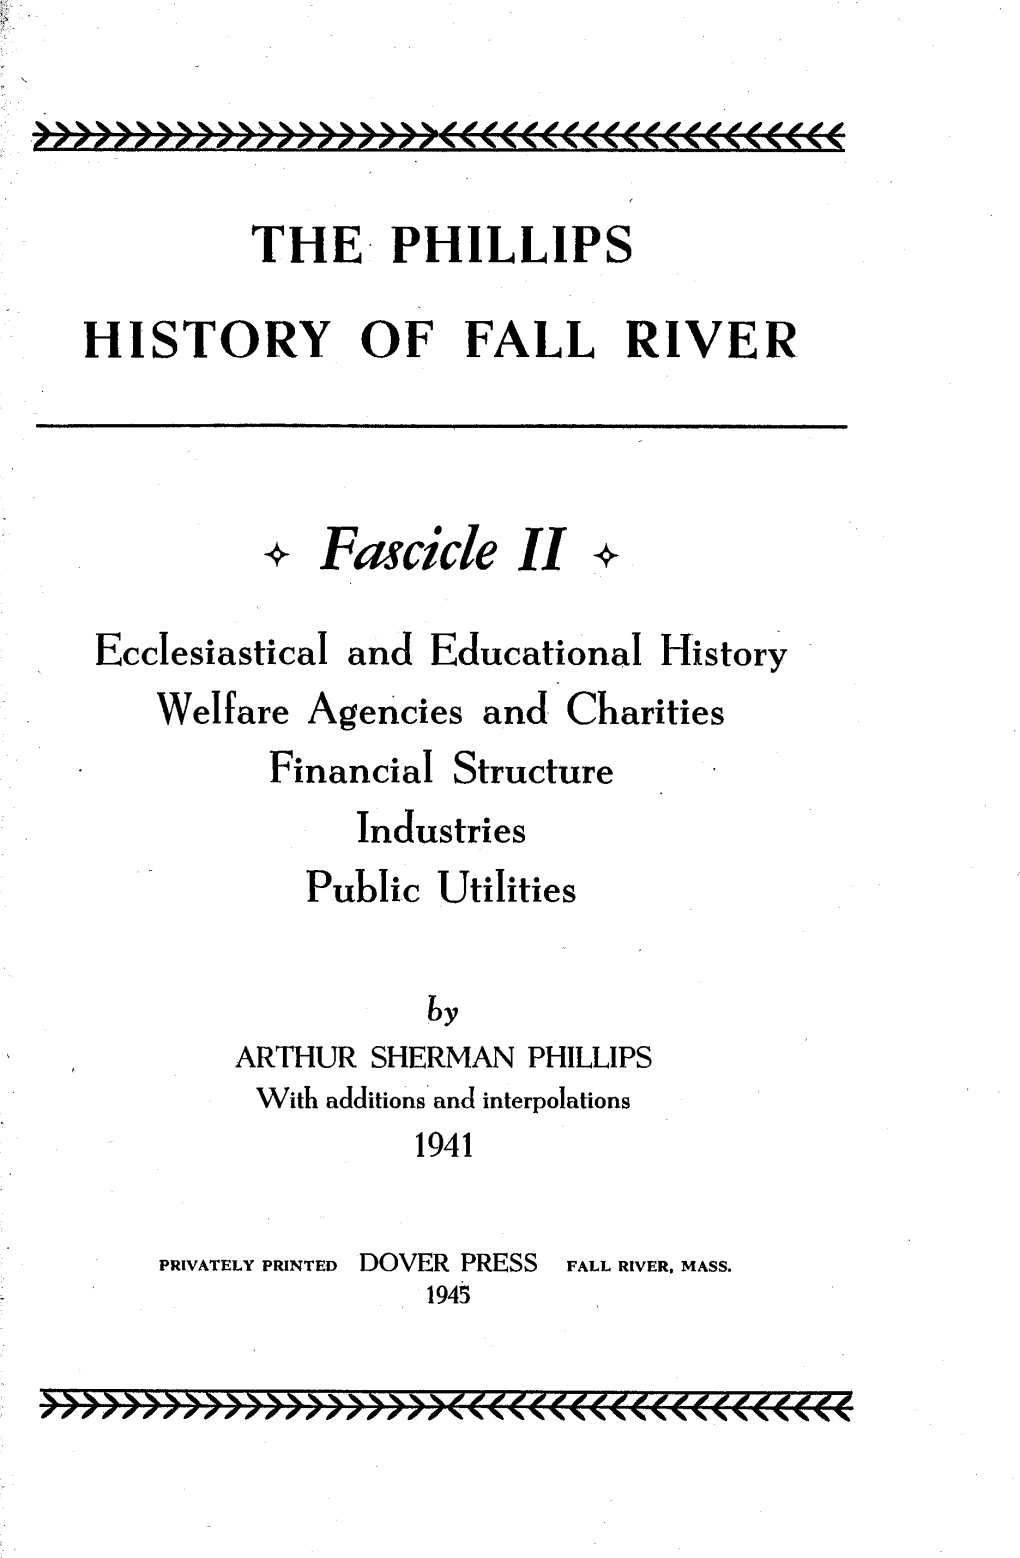 The Phillips History of Fall River